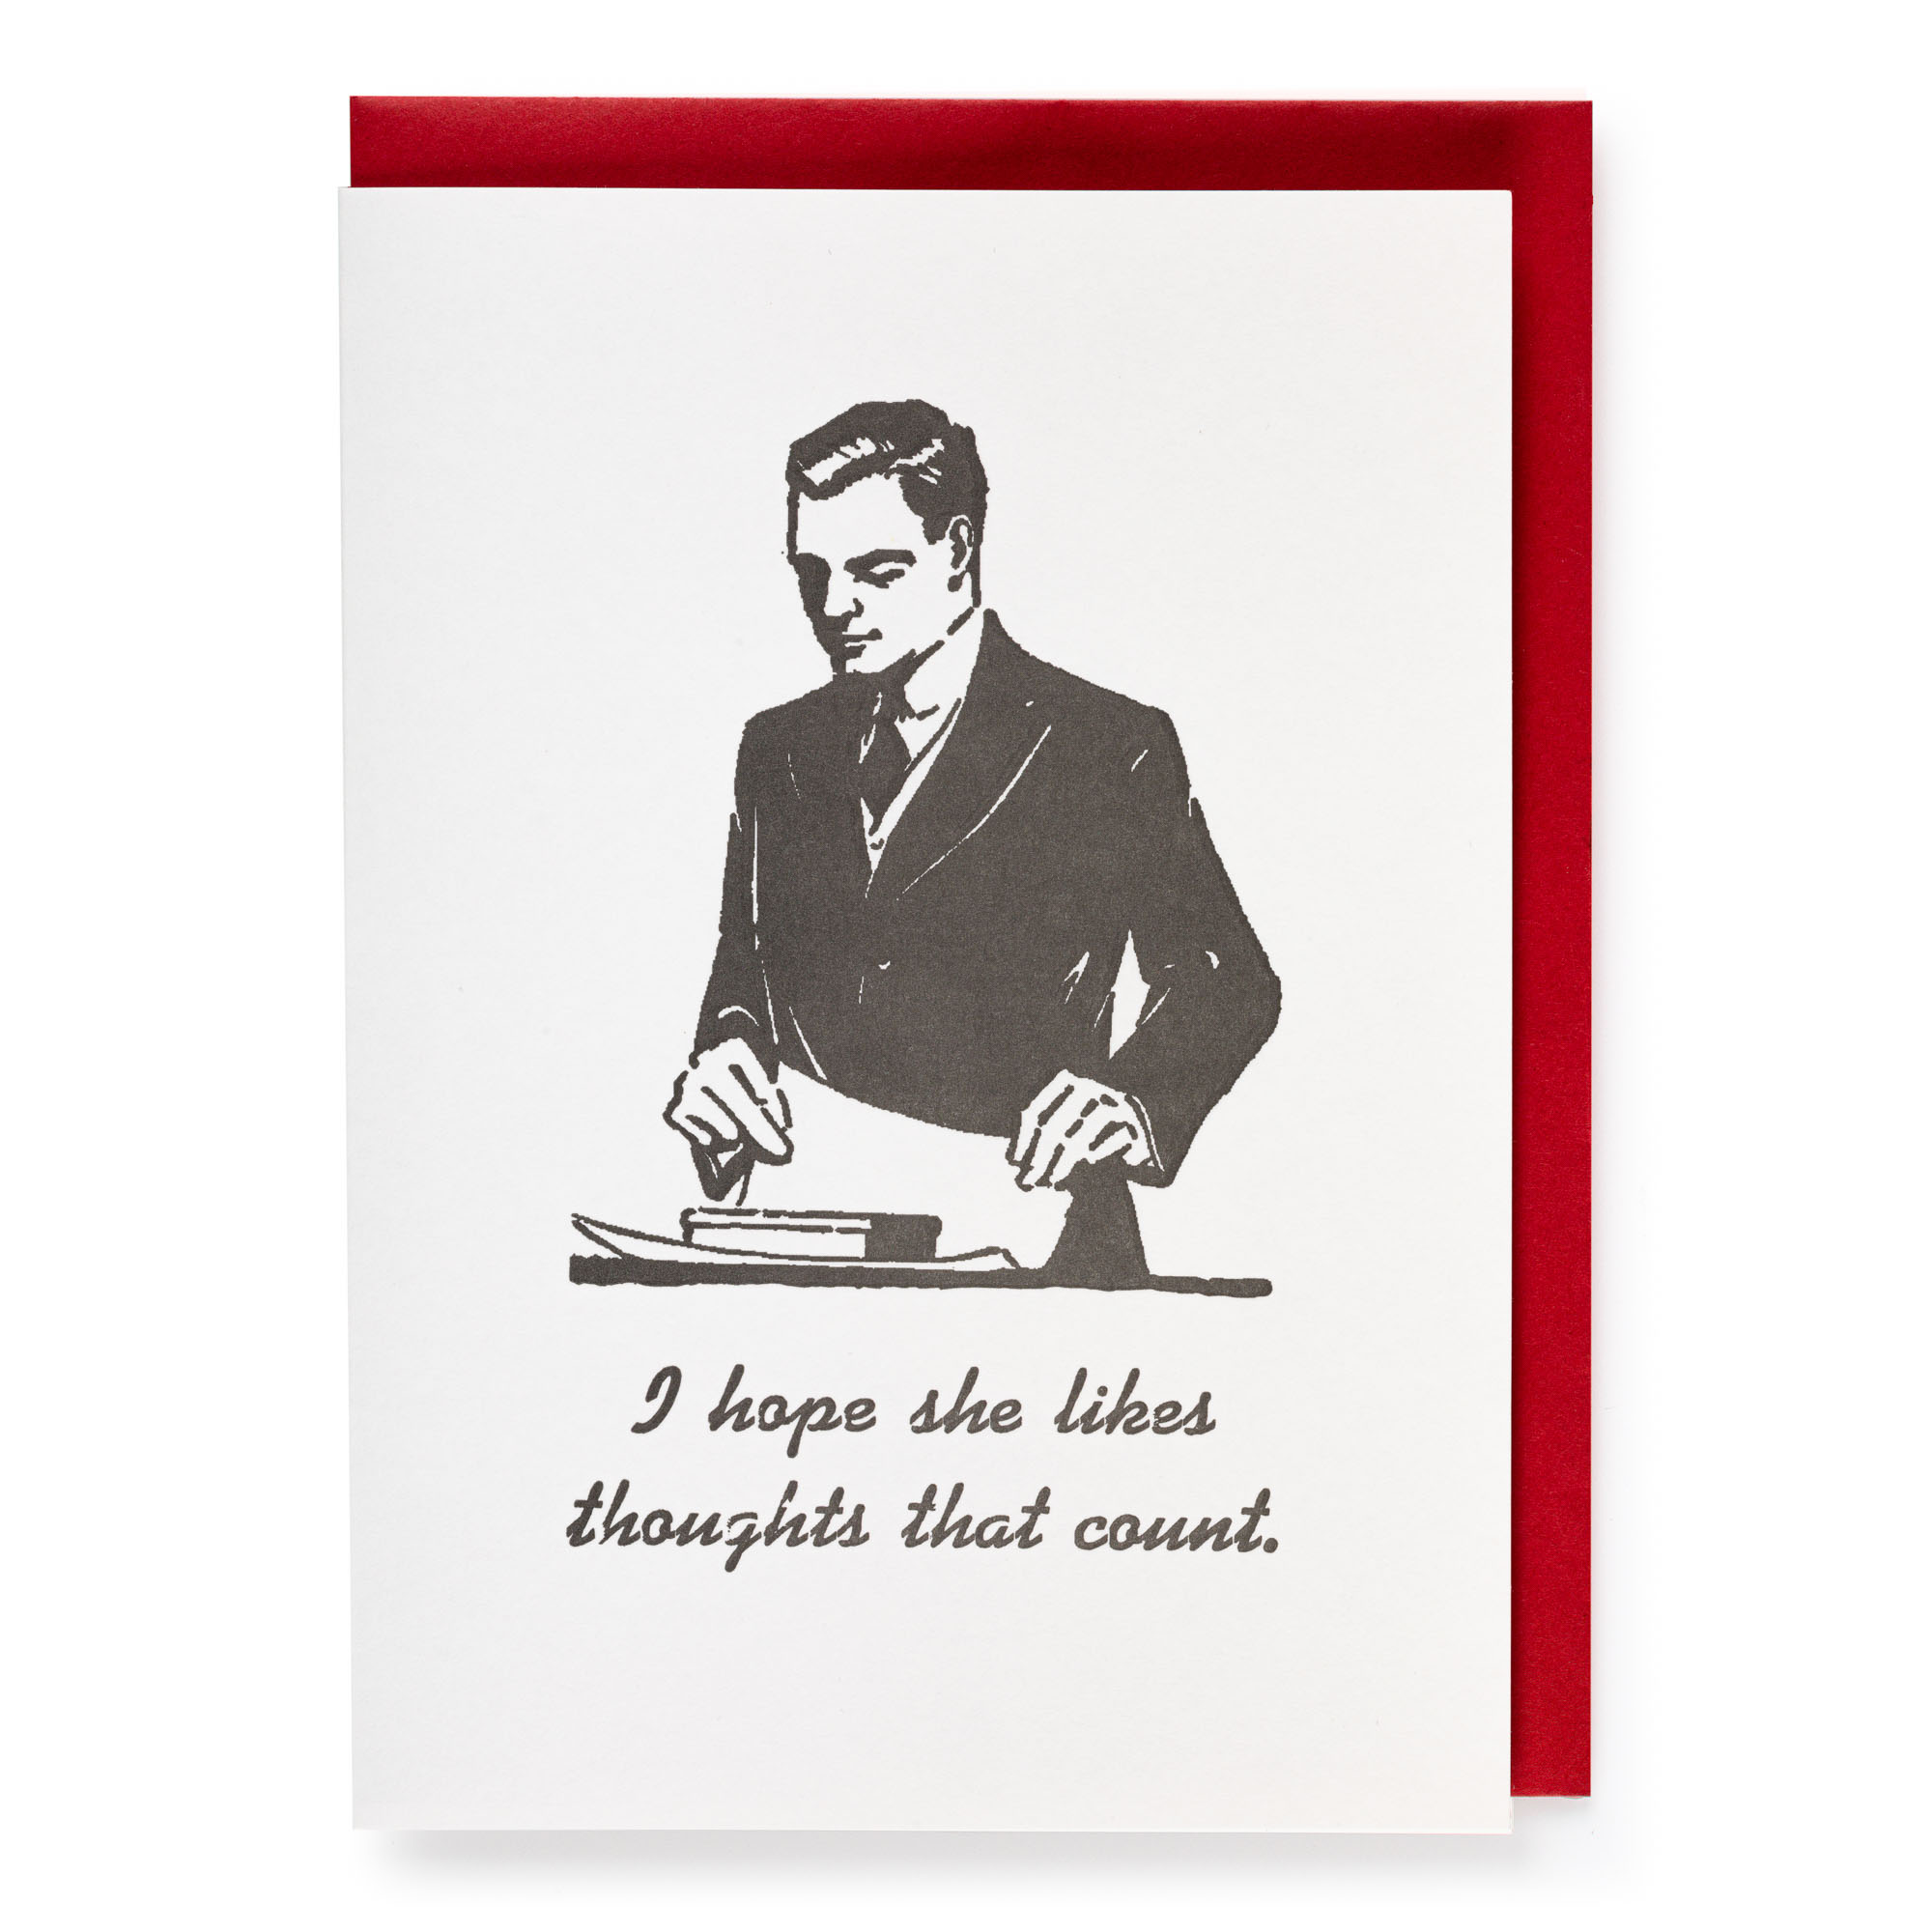 Thoughts that count - Letterpress Cards - Zeichen Press - from Archivist Gallery 